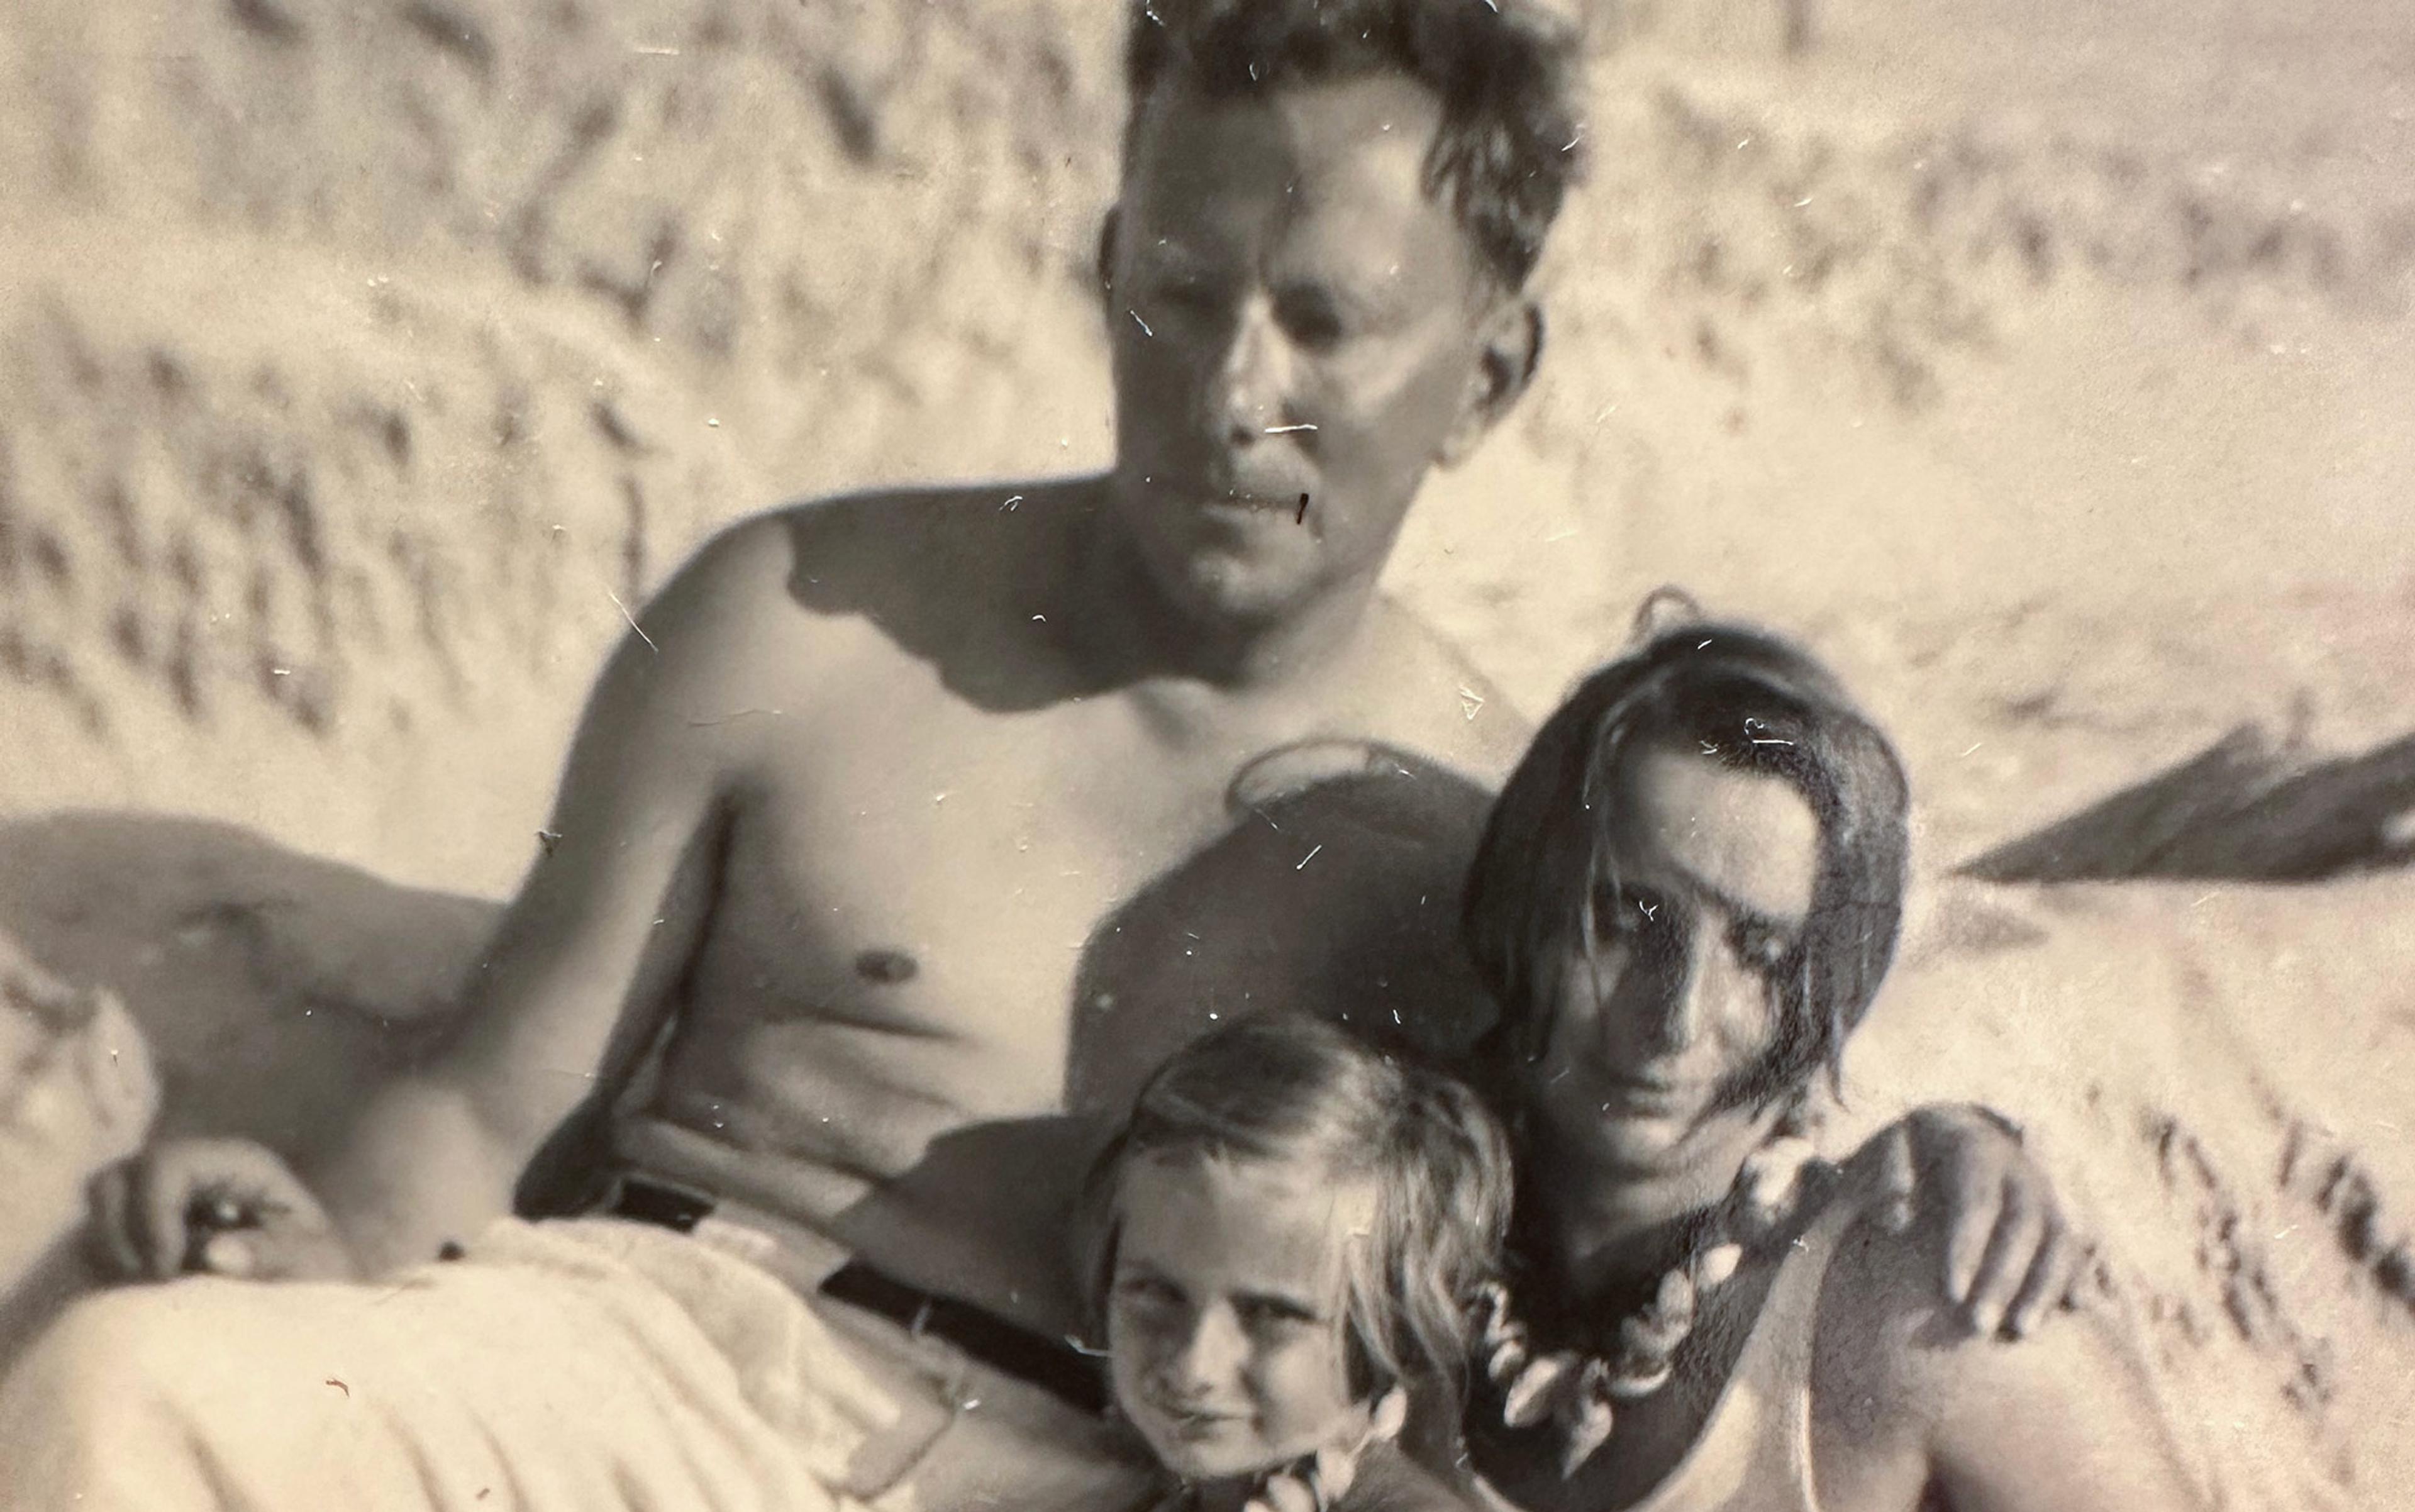 A sepia photo of a shirtless man, a woman, and a child sitting on a beach; the child and woman wear shell necklaces.